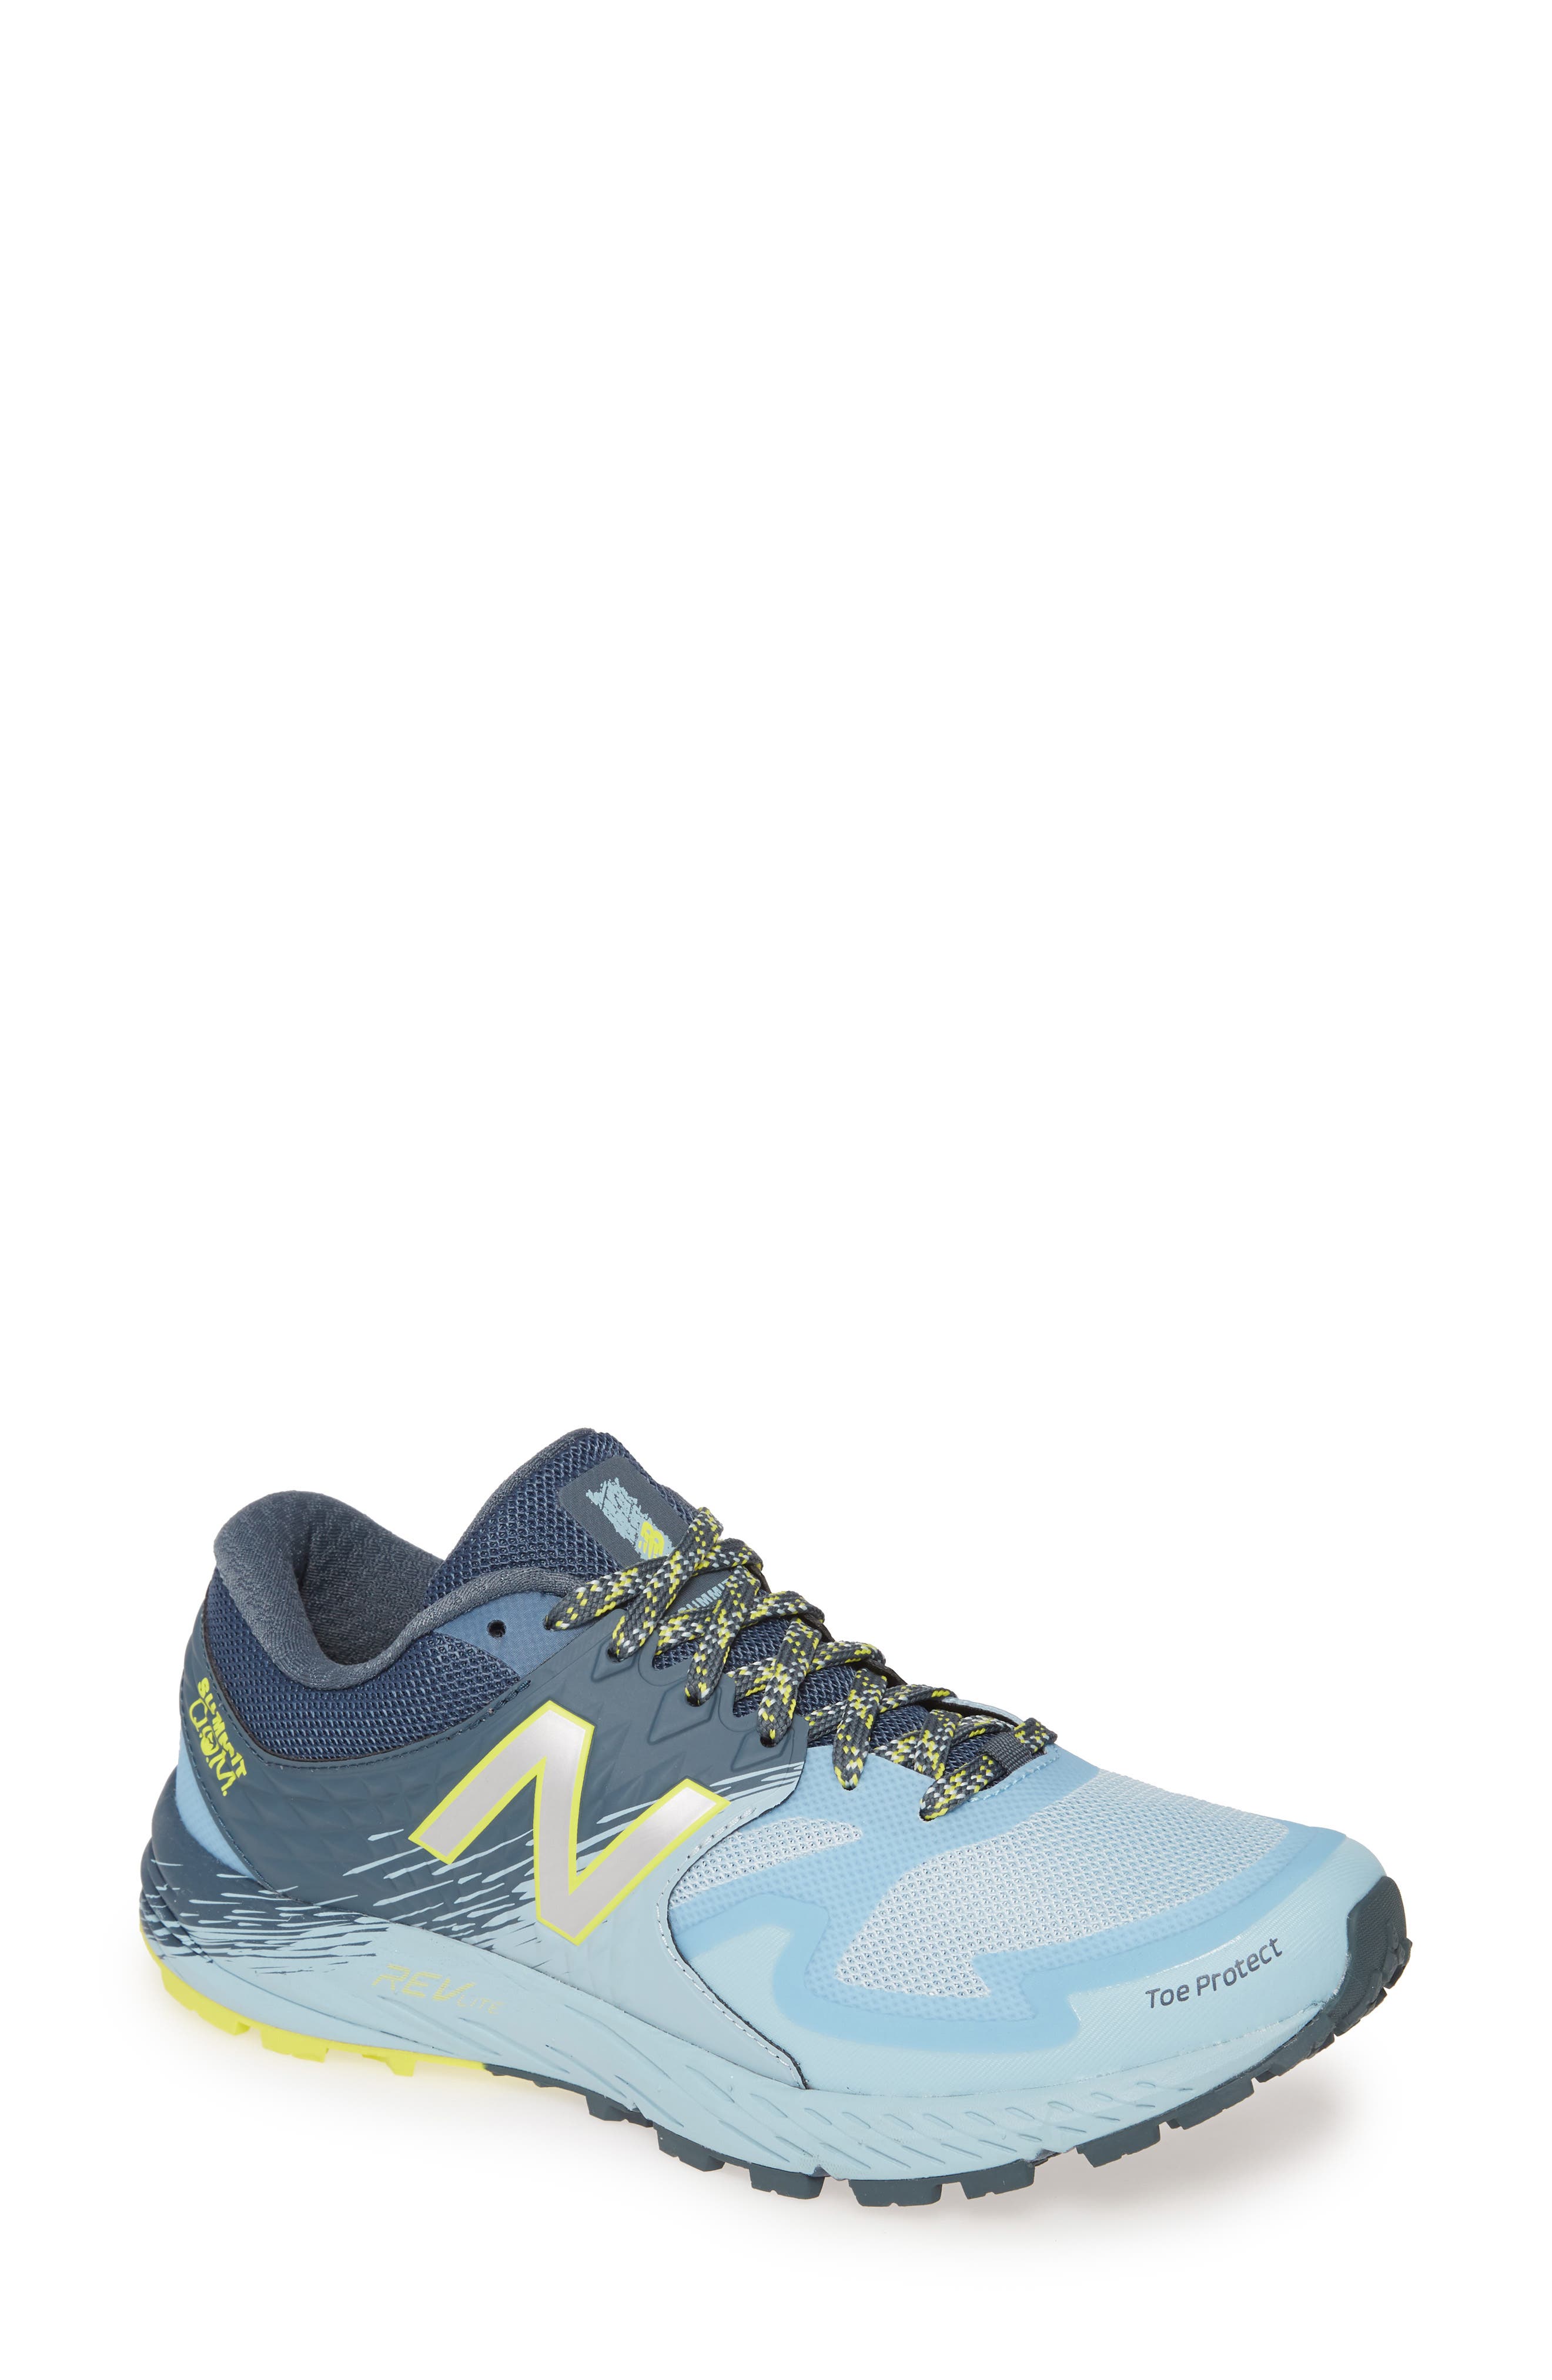 new balance running shoes nordstrom